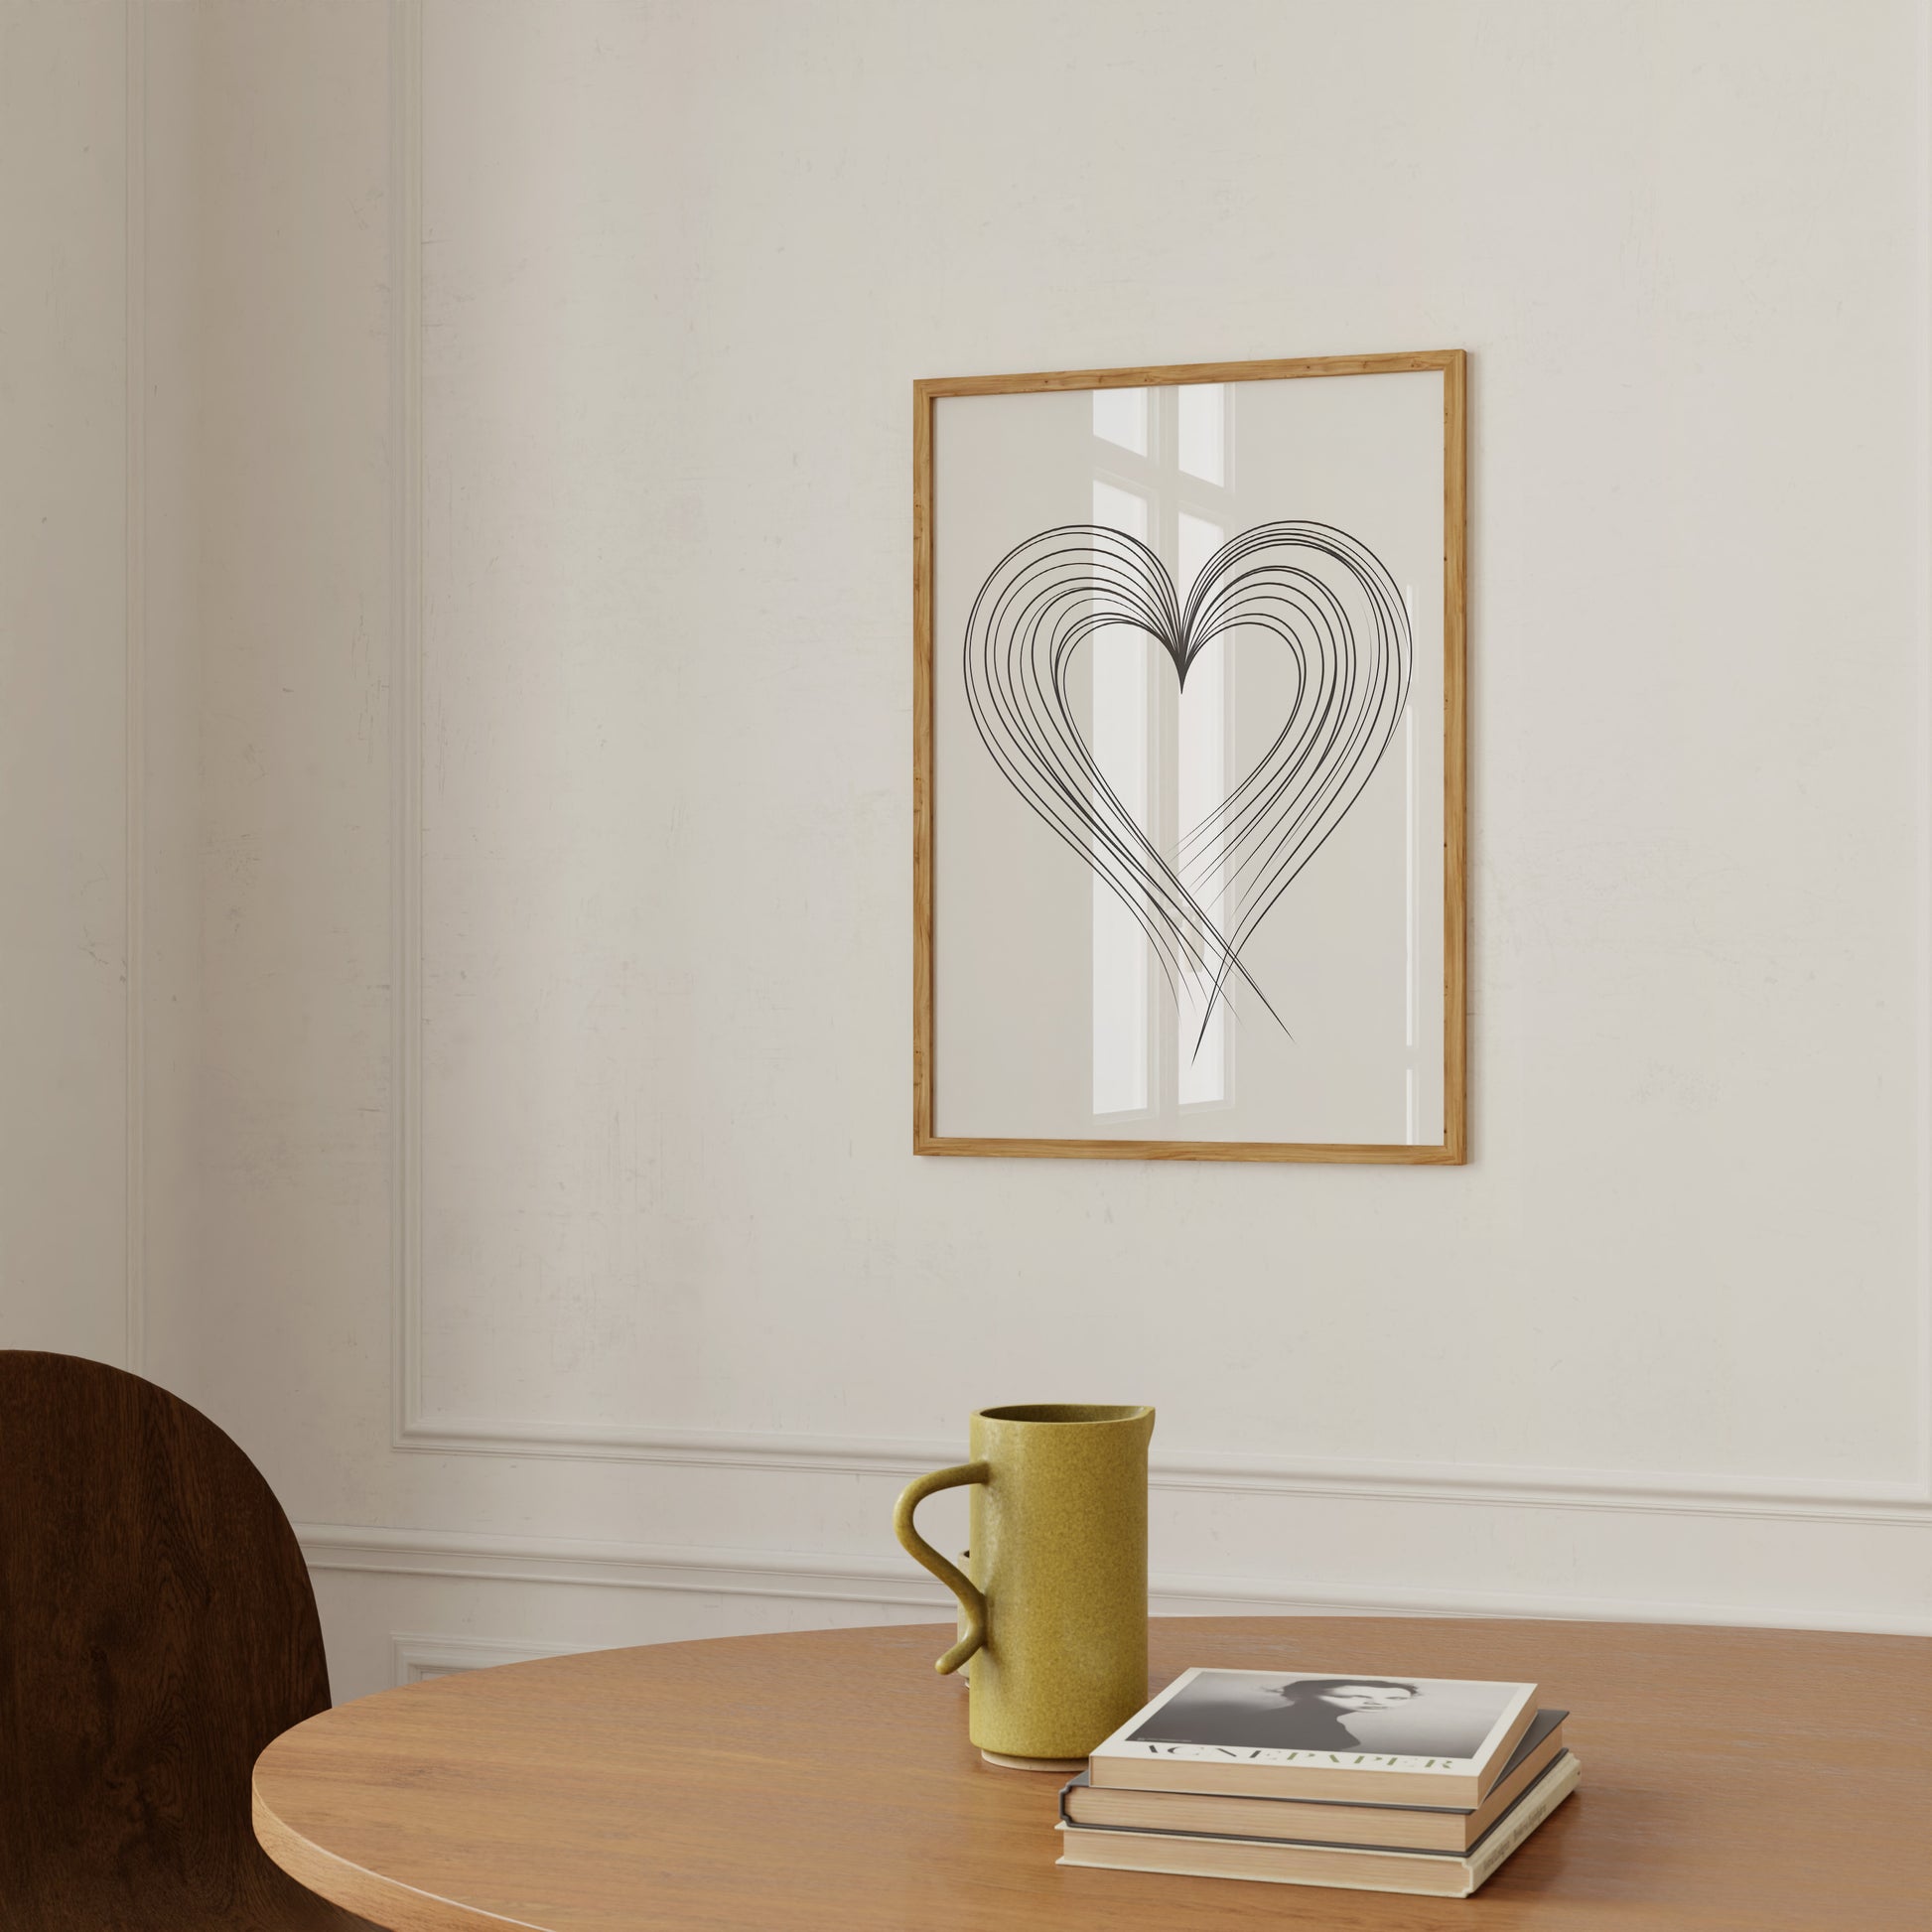 A framed heart illustration on a wall above a wooden table with a mug and books.